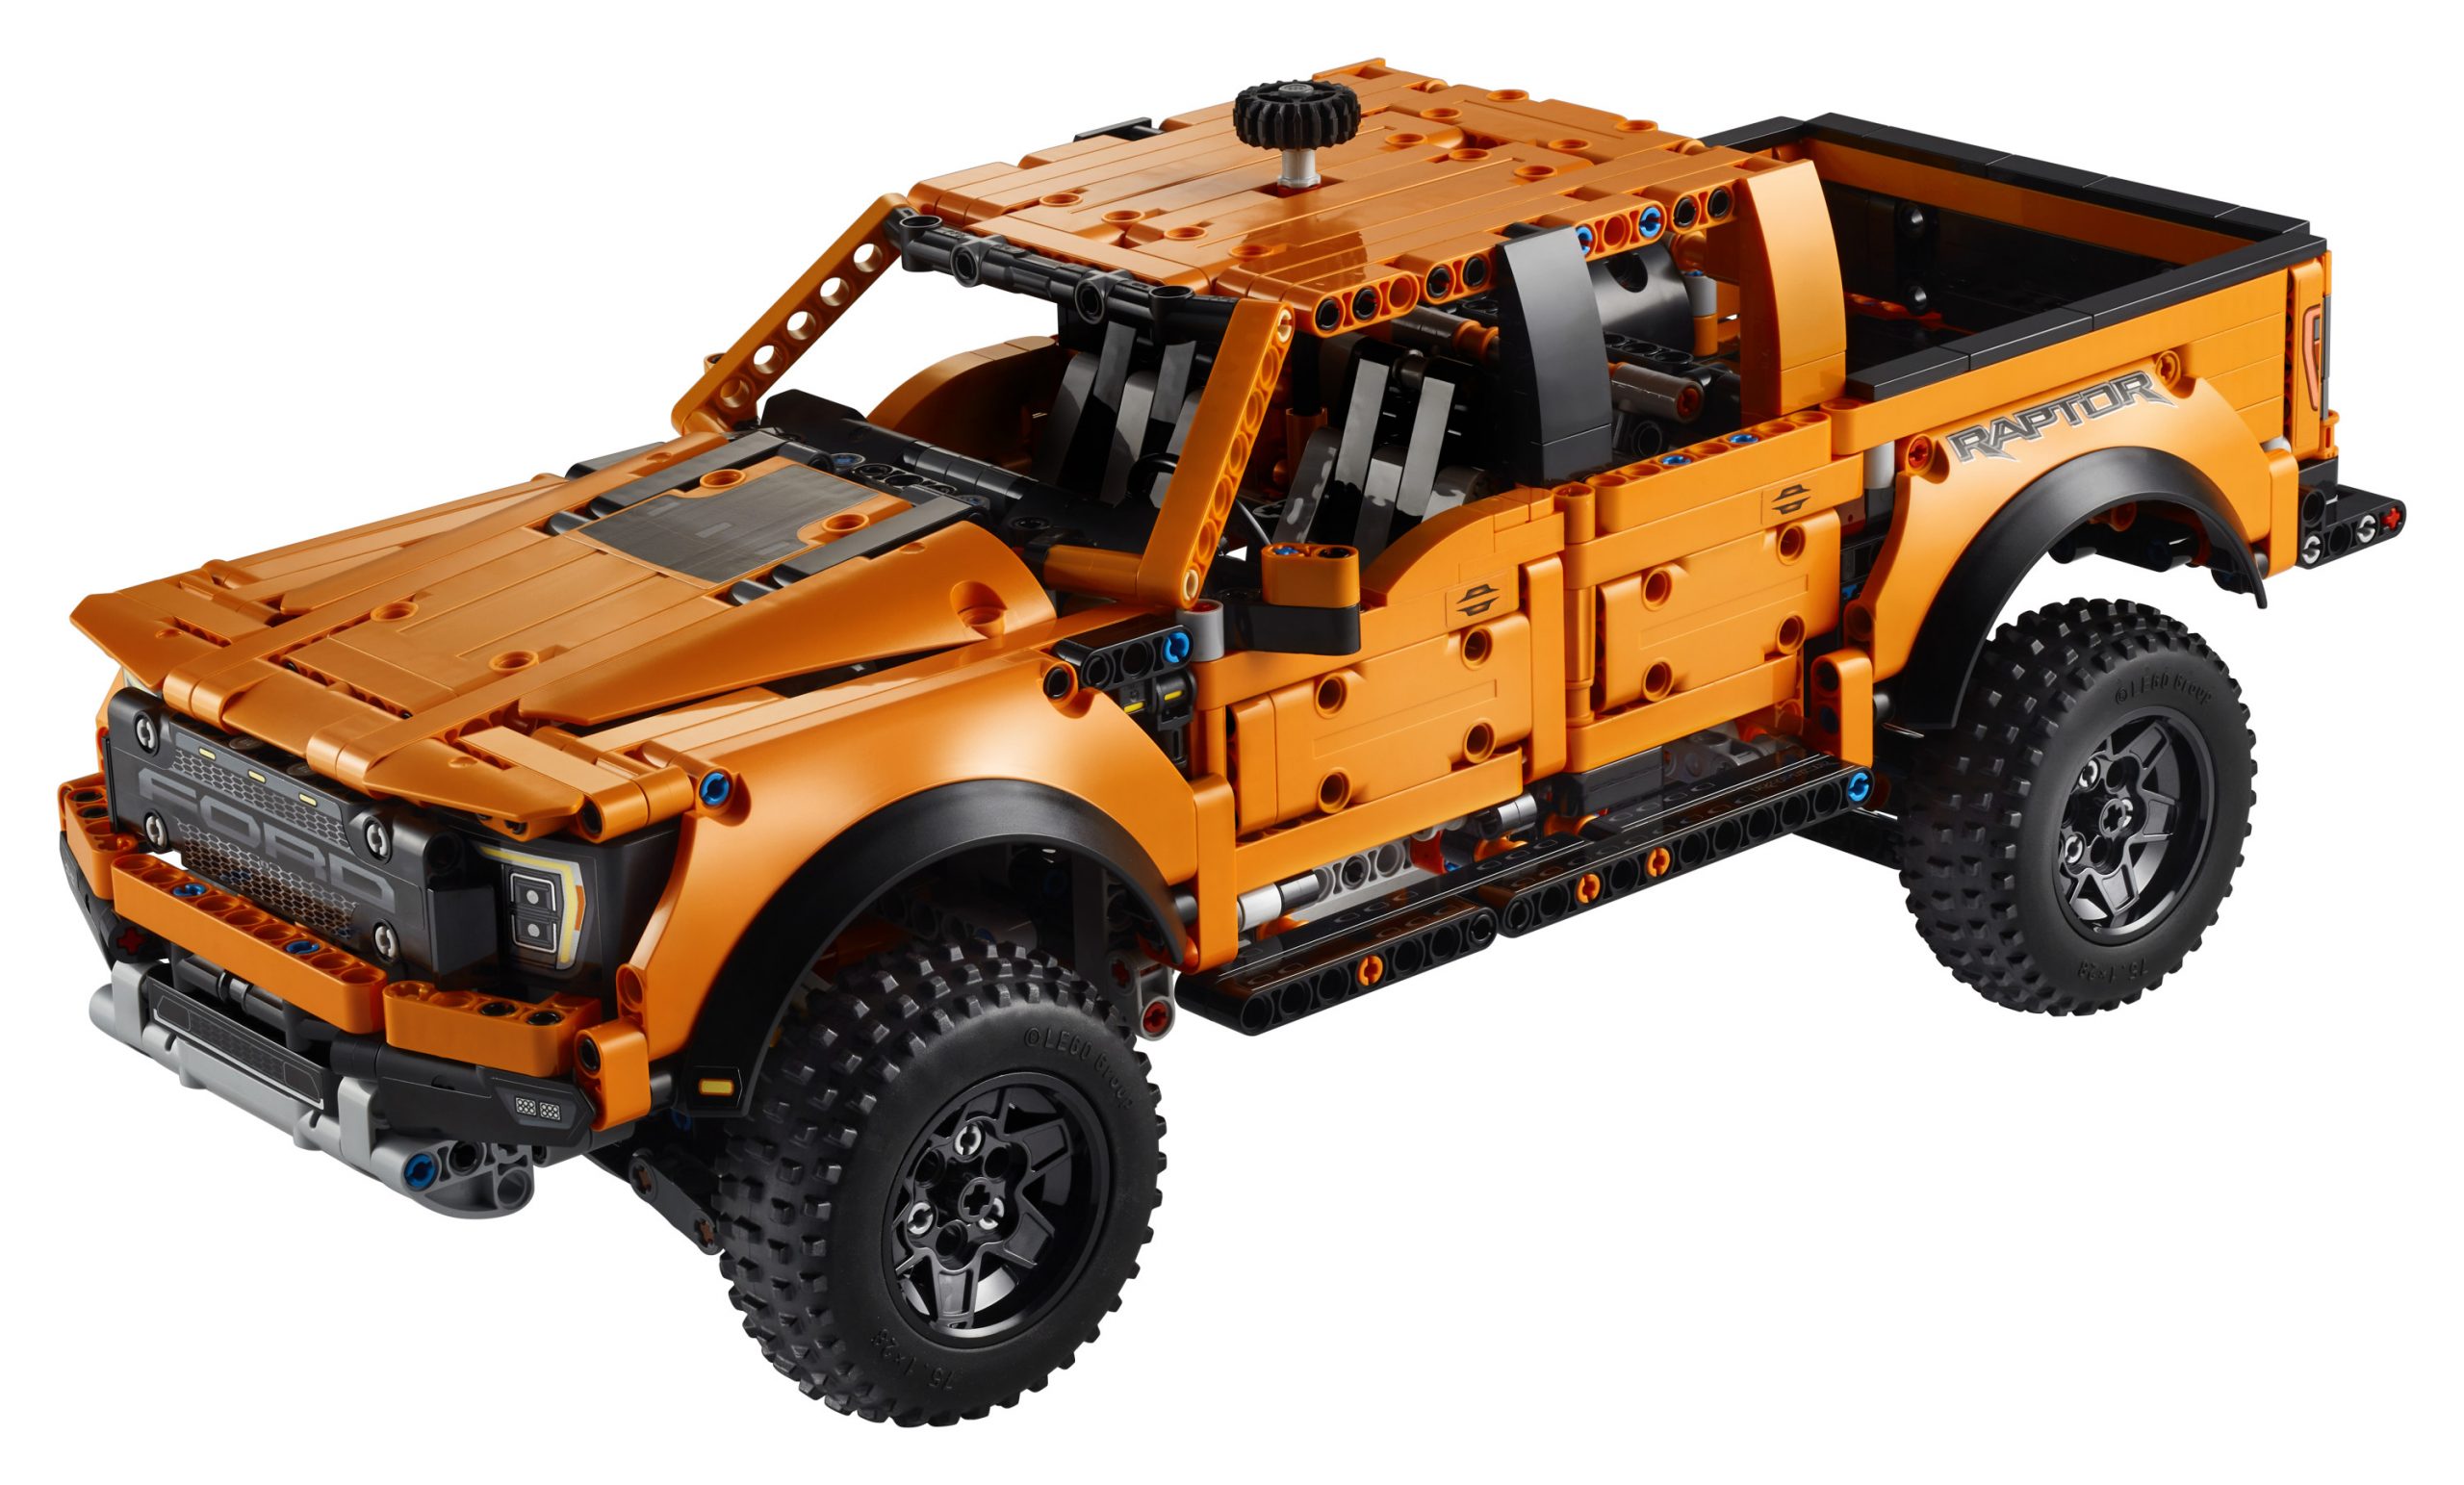 NOT Included The Lego Sets LMTIC RGB Color Changing Remote Control Lighting Kit for Lego Technic Ford F-150 Raptor 42126 Light Set Compatible with Lego Raptor Truck 42126 Light Kit for Lego 42126